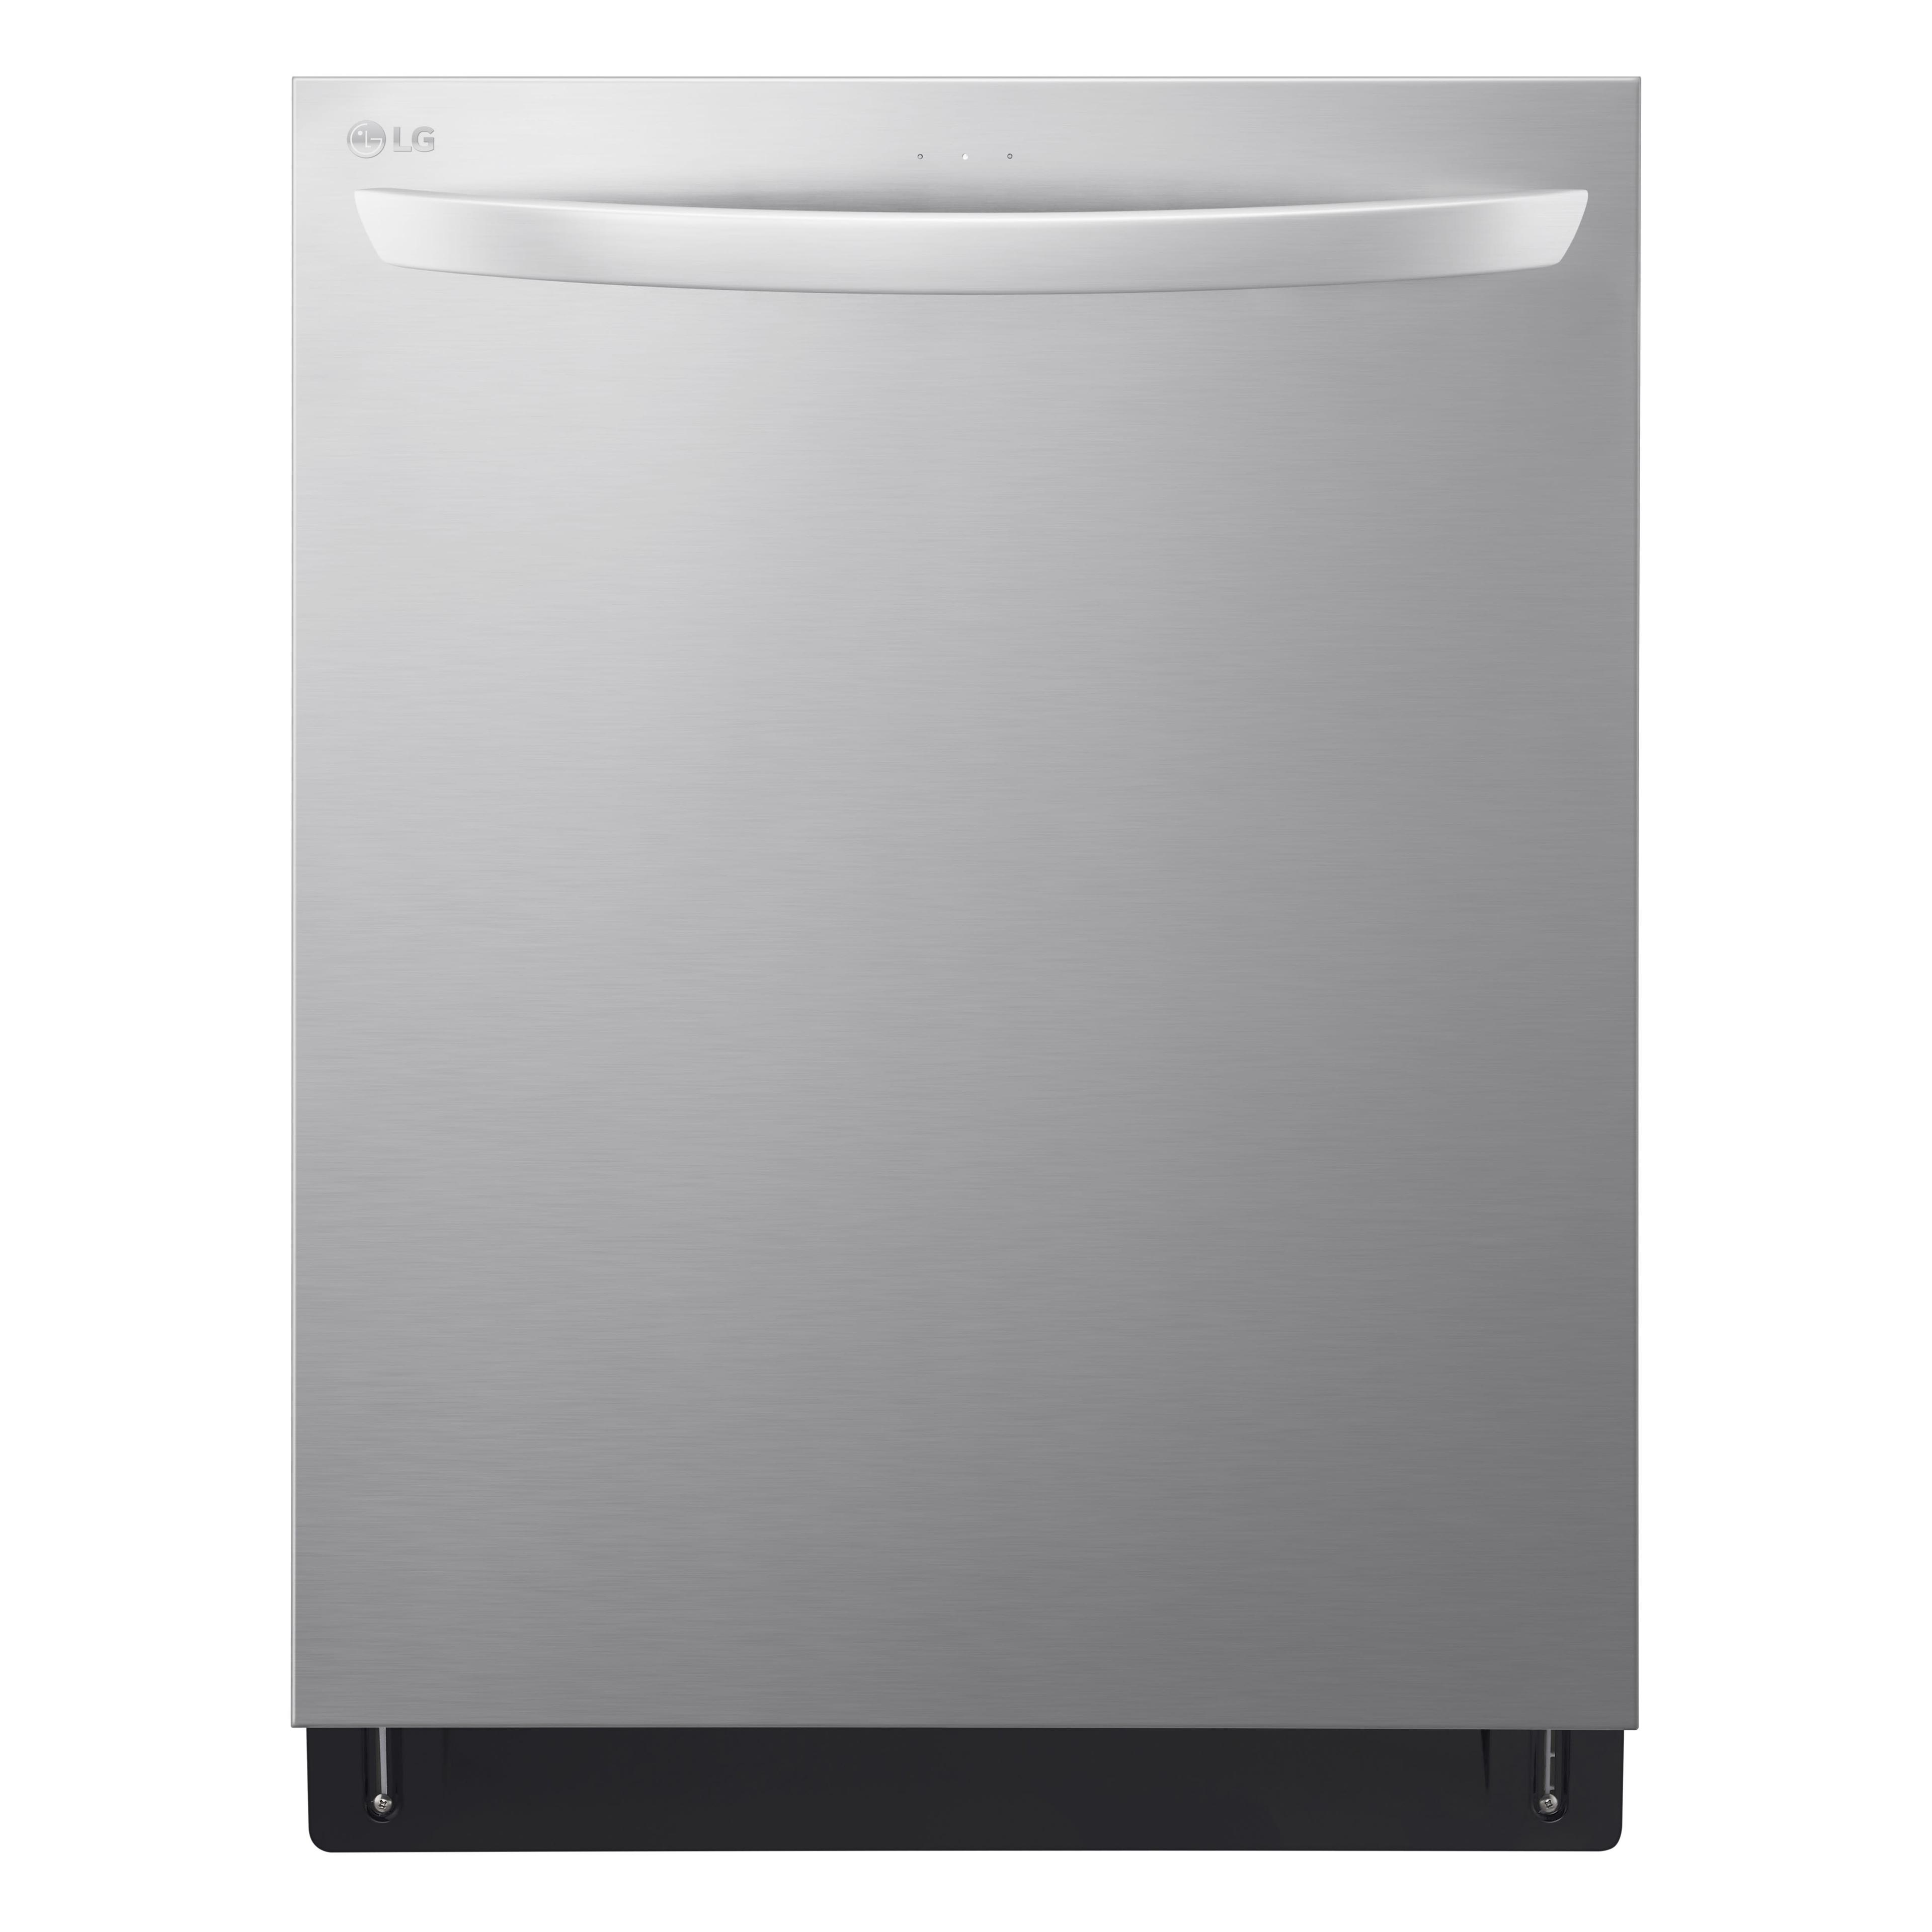 LG LDTS5552S 24 Inch Fully Integrated Smart Dishwasher in Stainless Steel